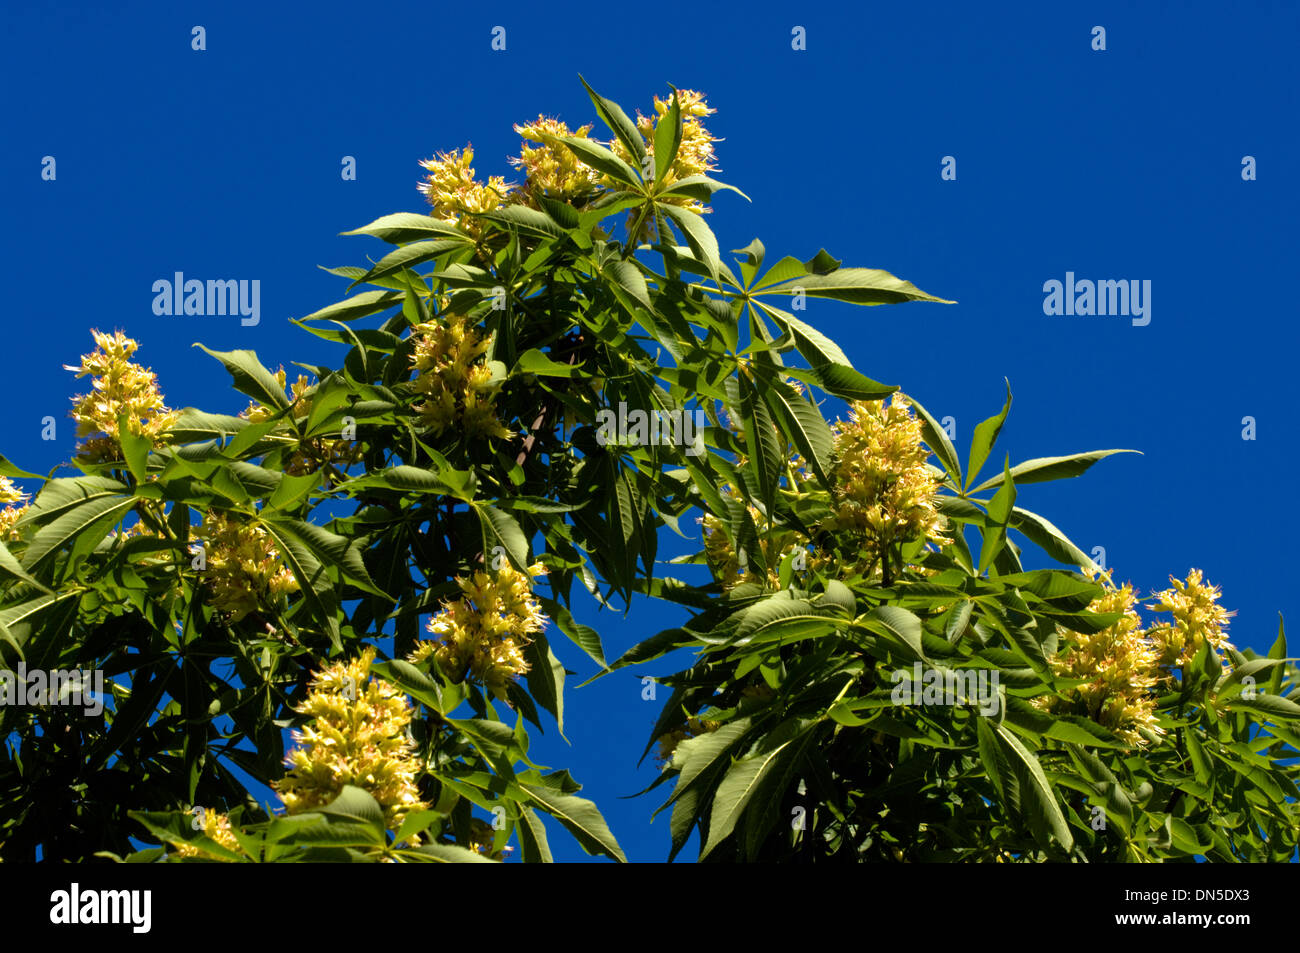 Horse Chestnut, Aesculus hippocastanum, disambiguation, cluster tree flowers against a blue sky. Stock Photo